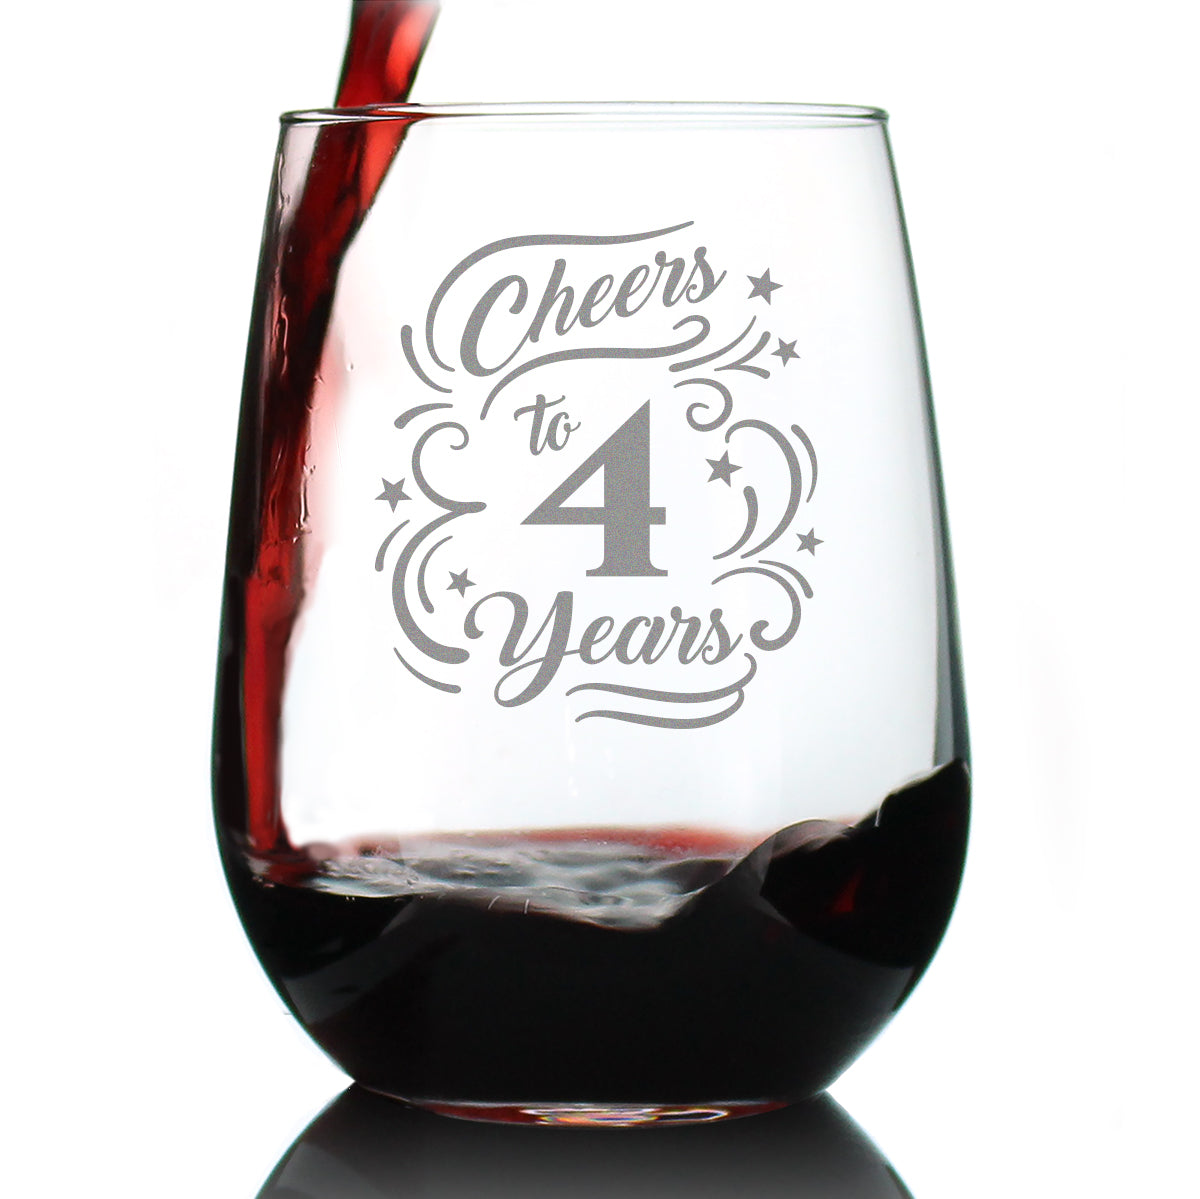 Cheers to 4 Years - Stemless Wine Glass Gifts for Women & Men - 4th Anniversary Party Decor - Large 17 Oz Glasses